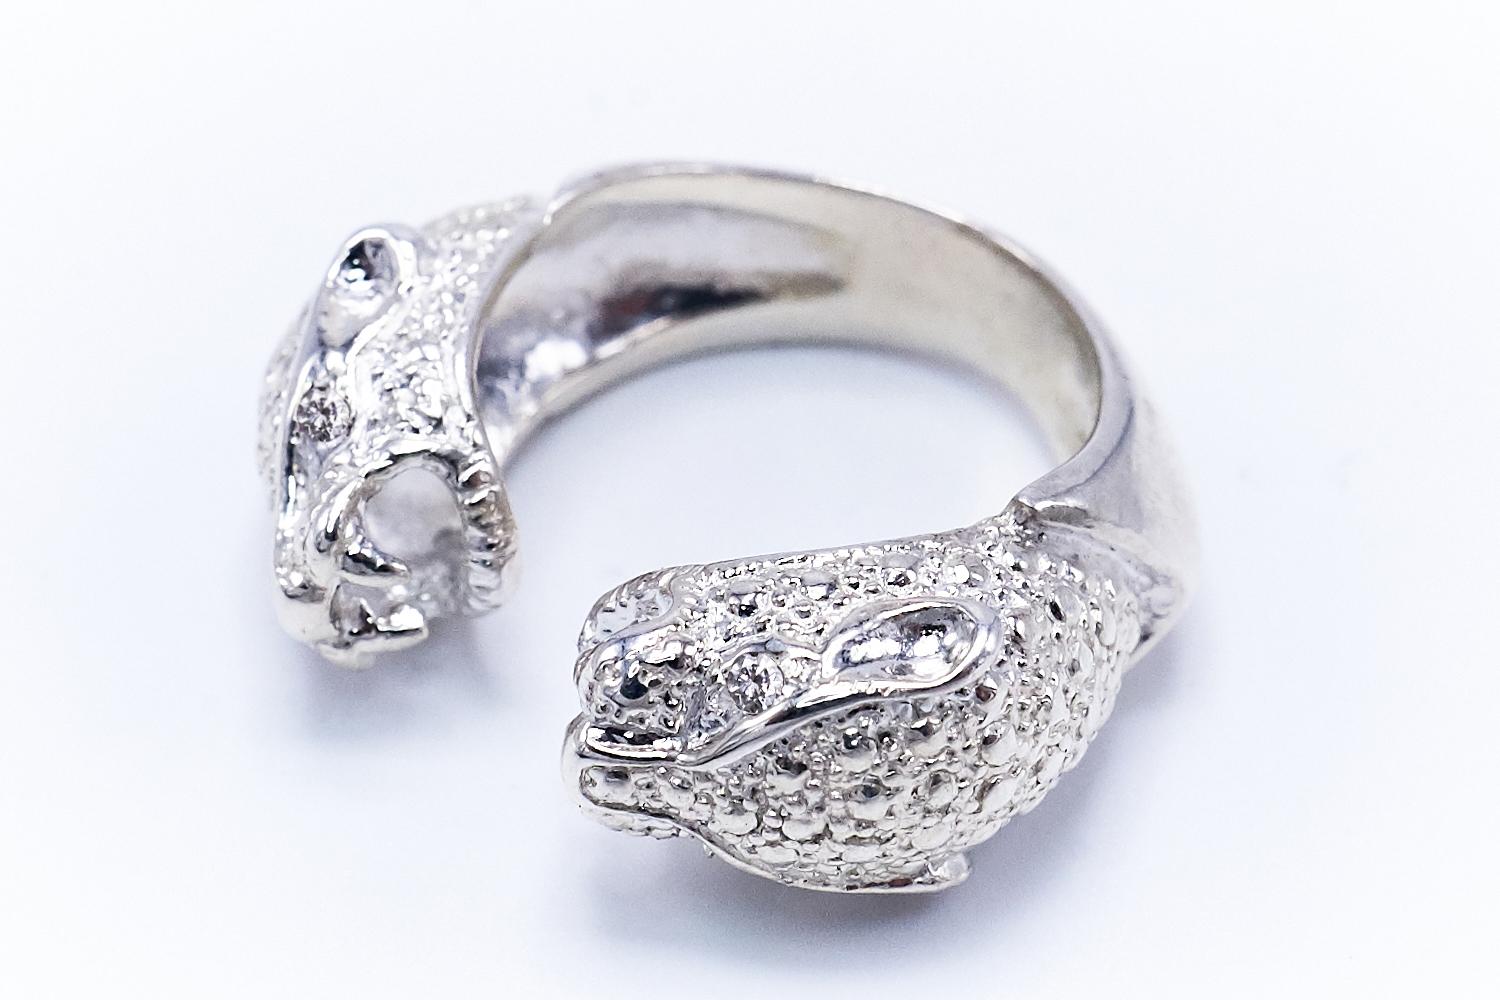 Contemporary Jaguar Ring White Diamond Gold Animal Jewelry Cocktail Ring J Dauphin For Sale